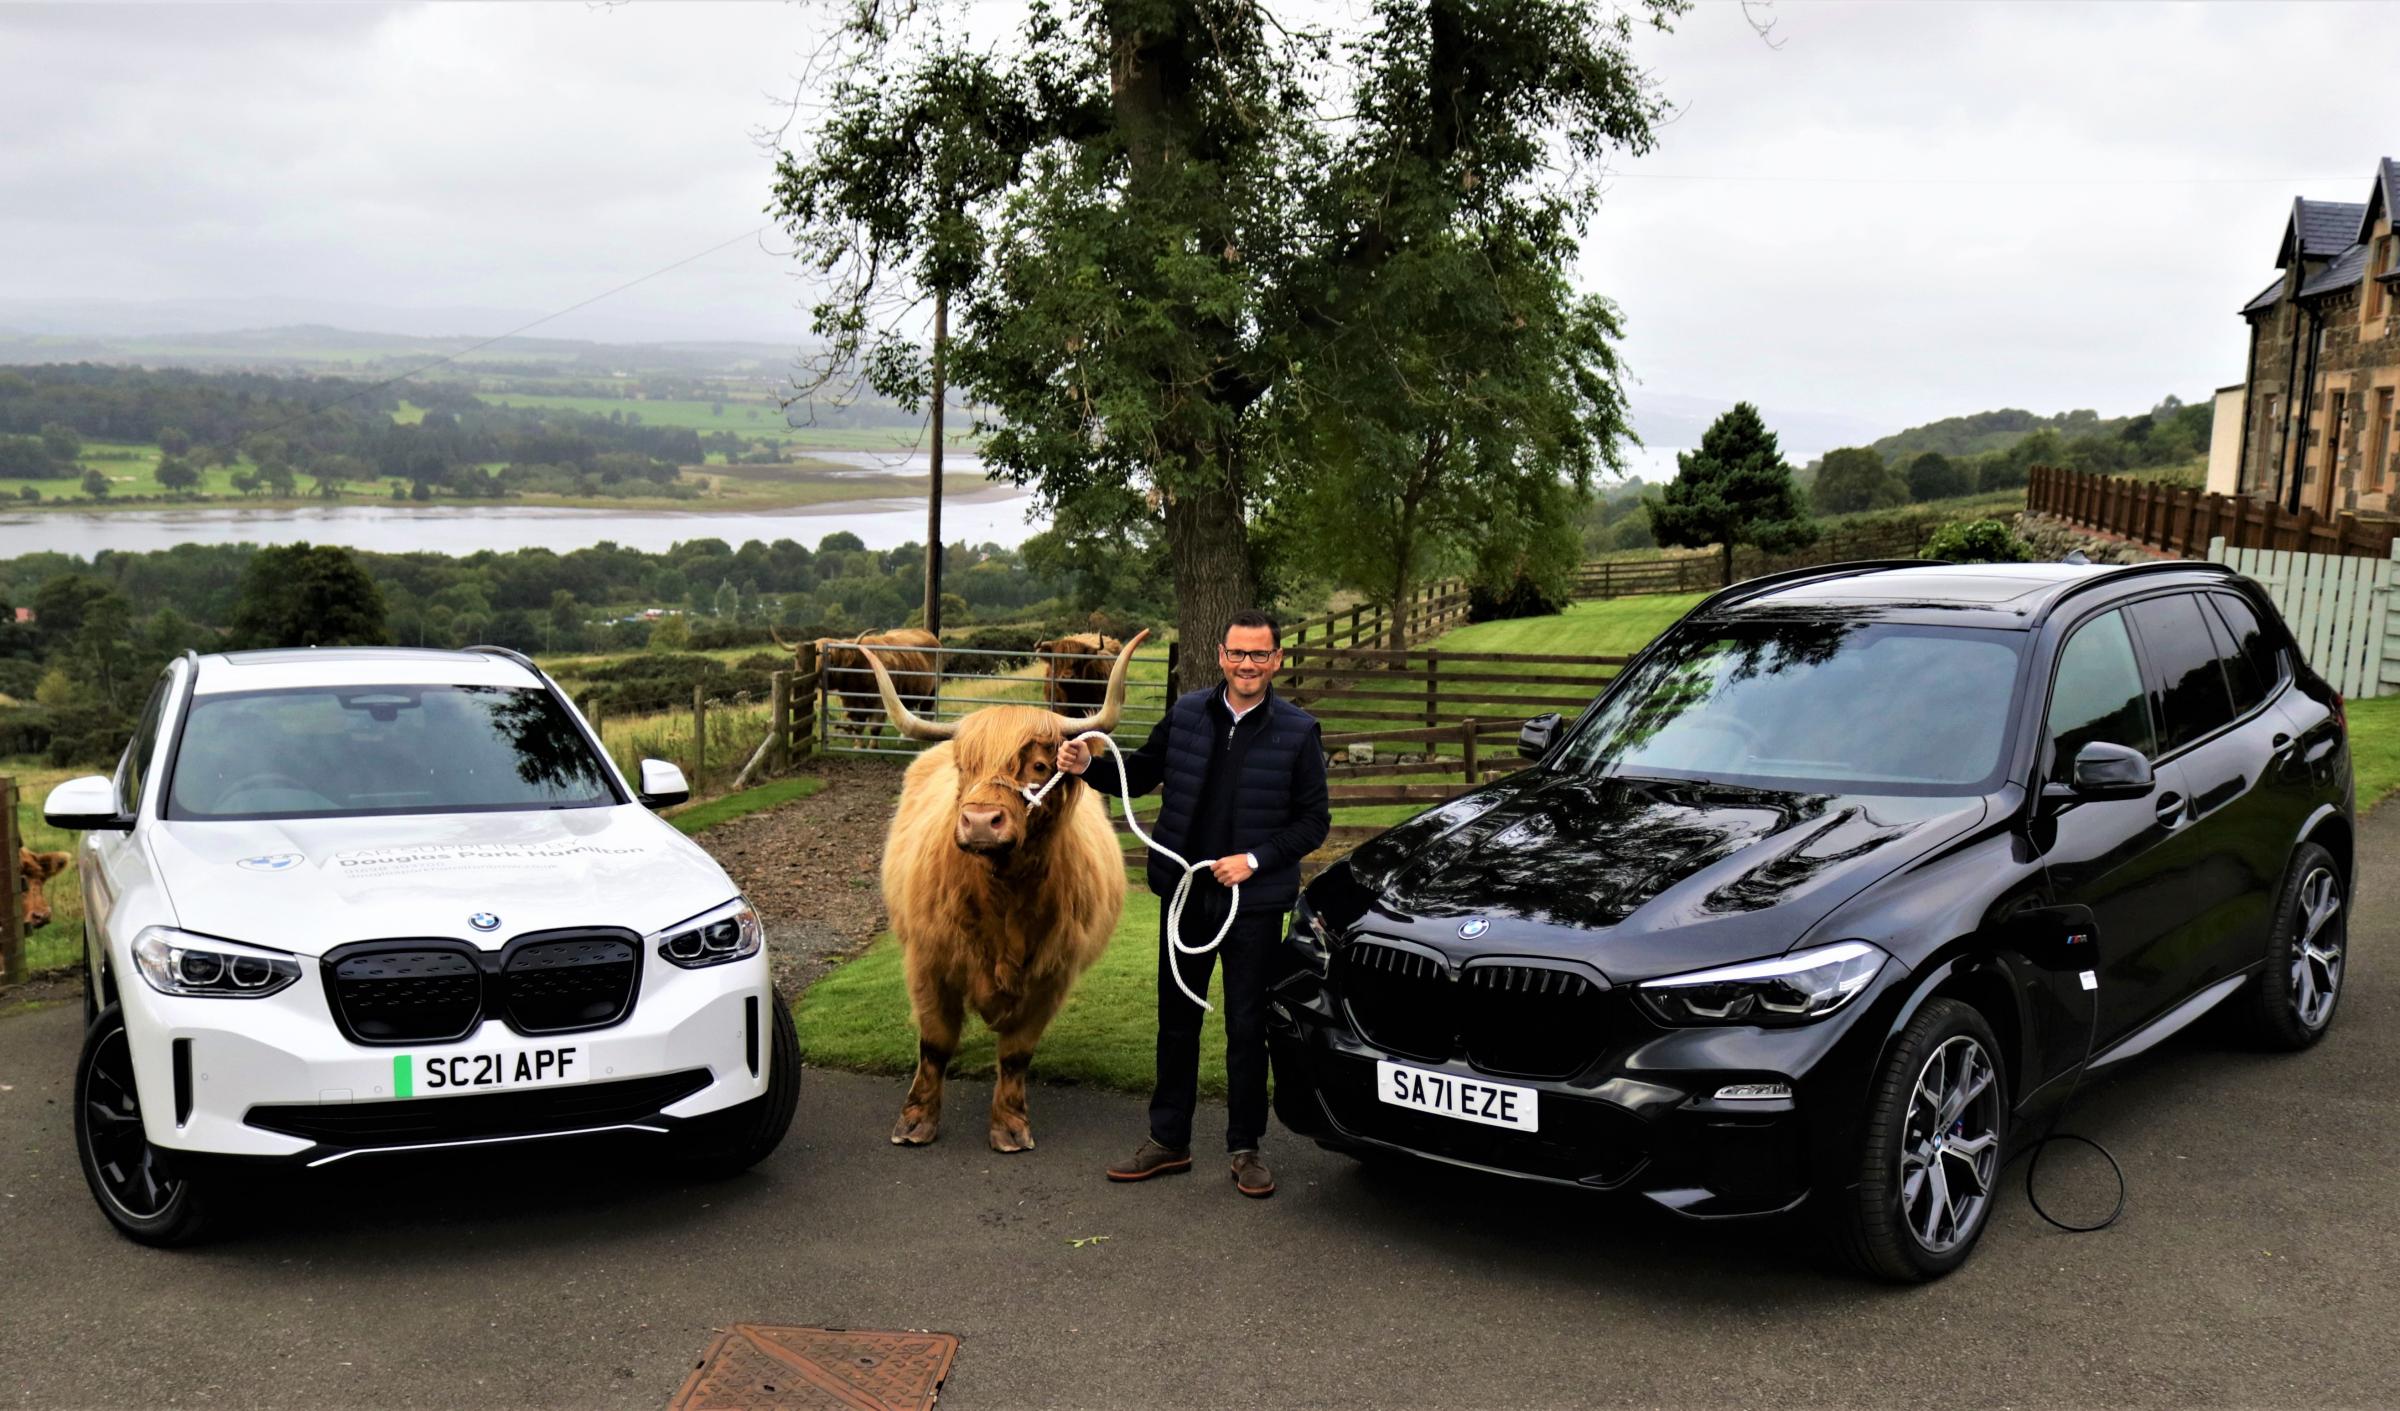 Highland cows and green cars are now playing a major role in a change of direction for one farm holiday accommodation business overlooking the River Clyde